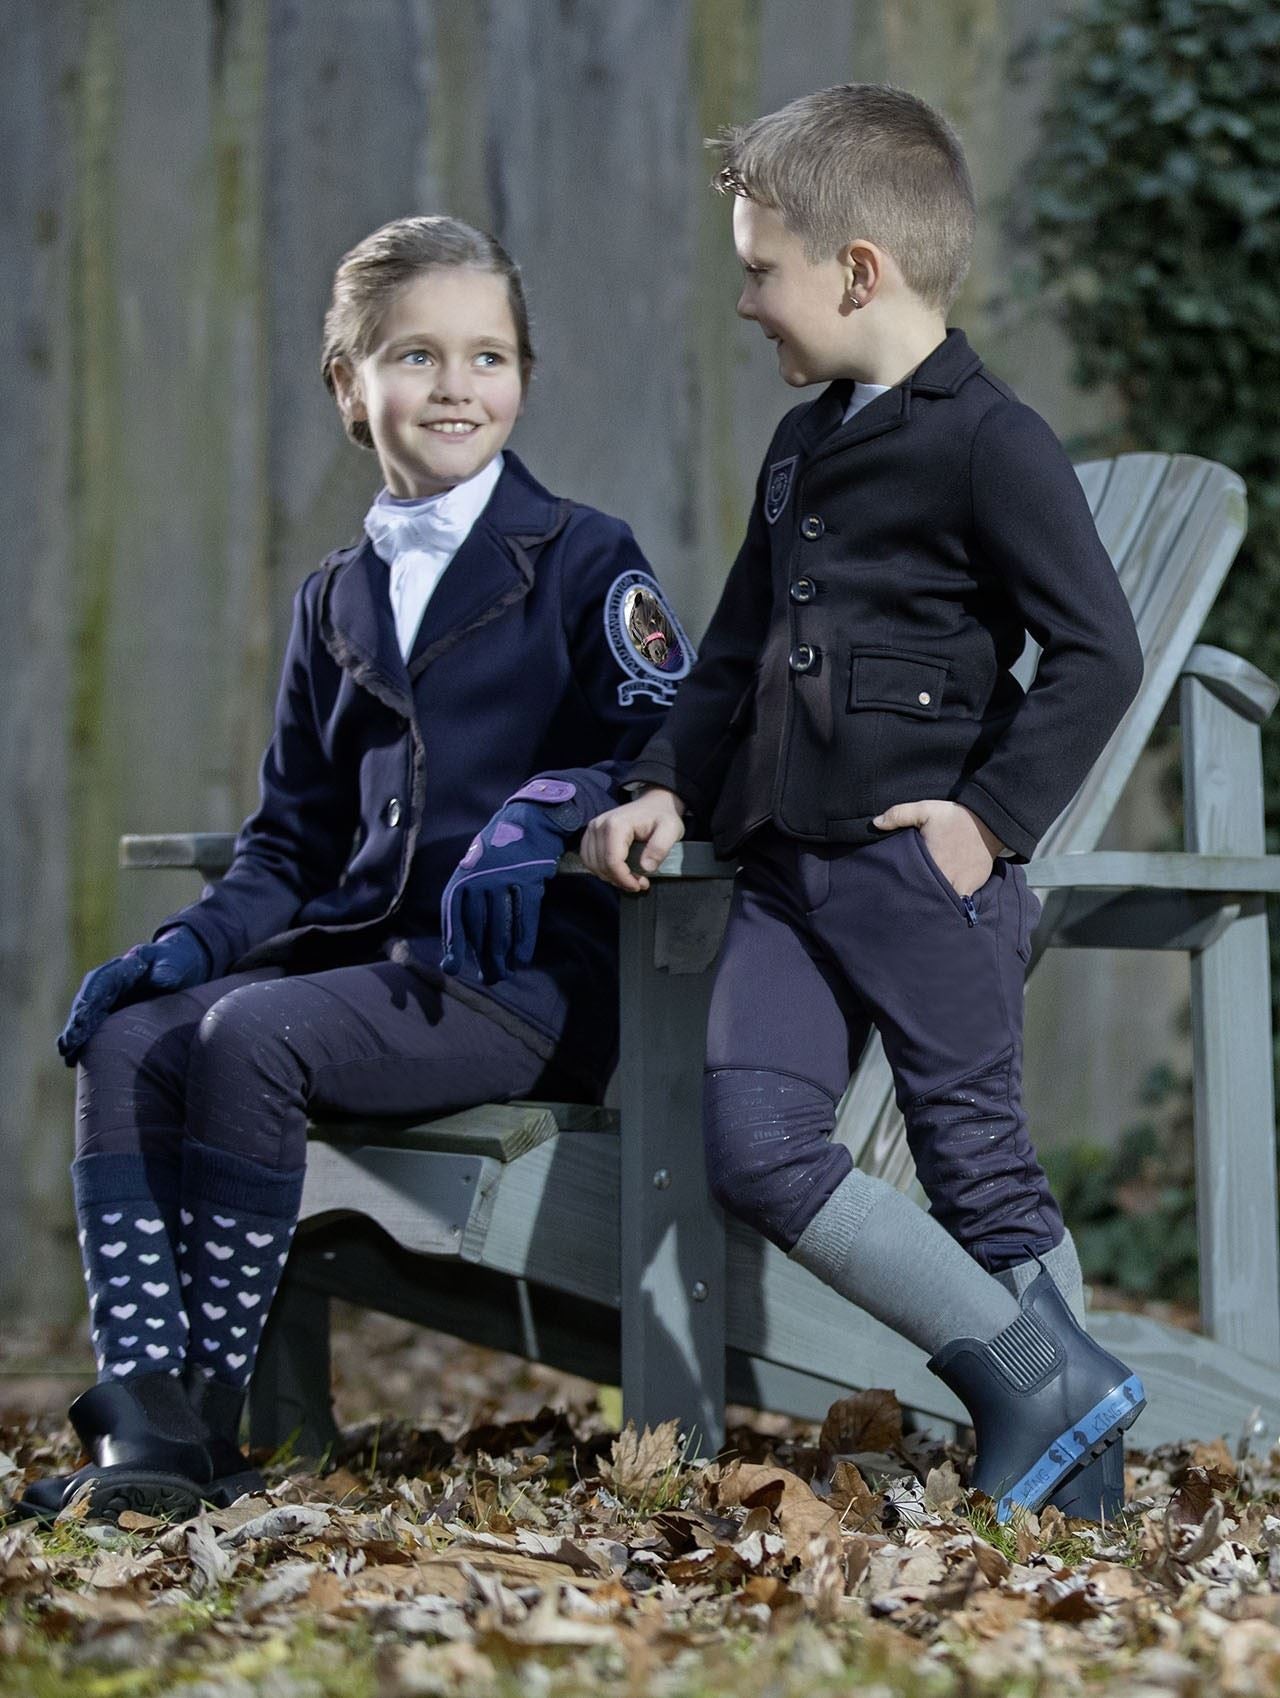 HKM Competition Jacket Santa Fe - Just Horse Riders